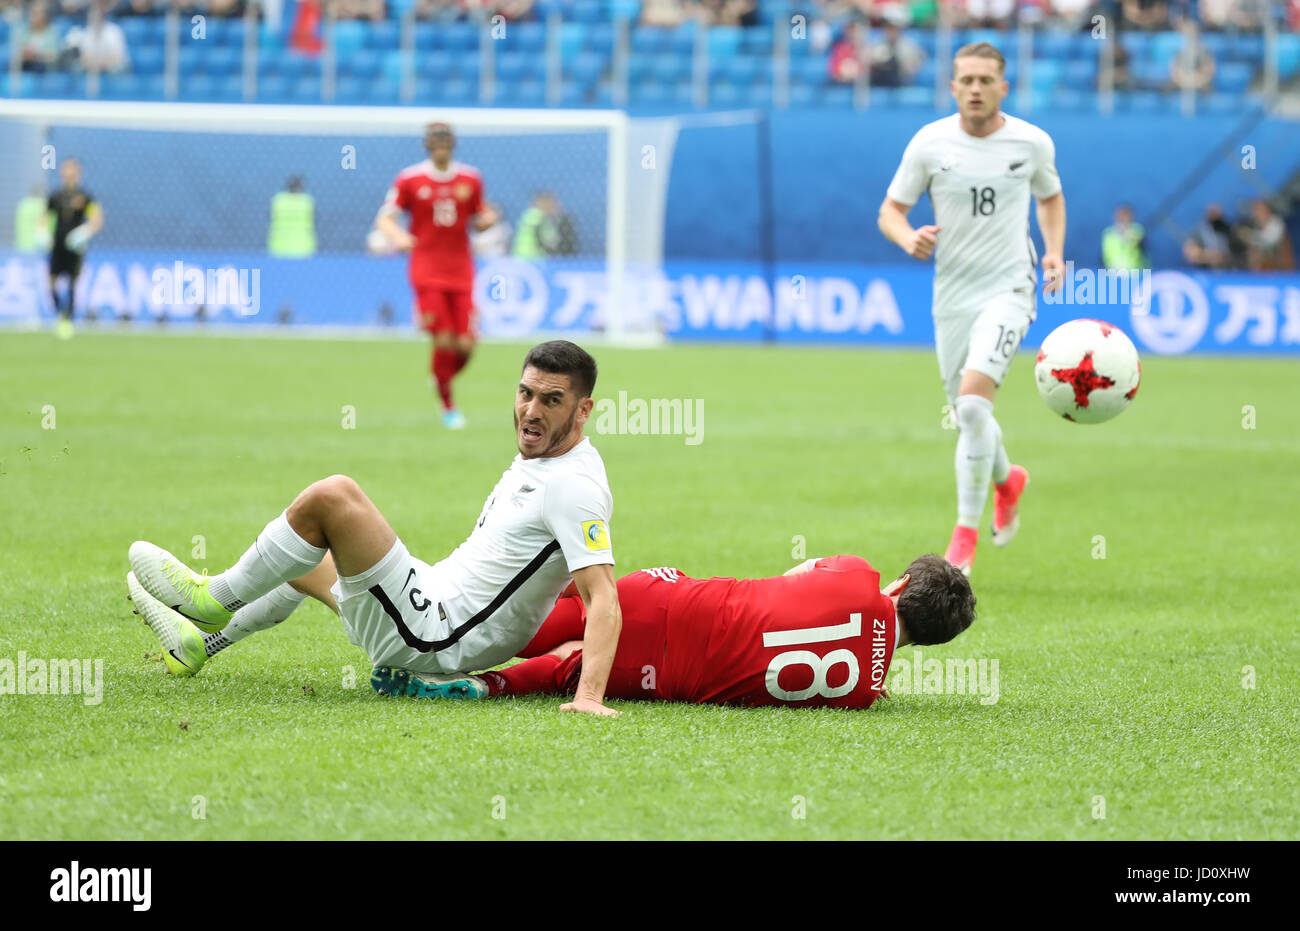 St. Petersburg, Russia. 17th June, 2017. Yury Zhirkov (R) of Russia vies with Michael Boxall of New Zealand during the group A match between Russia and New Zealand of the 2017 FIFA Confederations Cup in St. Petersburg, Russia, on June 17, 2017. Russia won 2-0. Credit: Xu Zijian/Xinhua/Alamy Live News Stock Photo